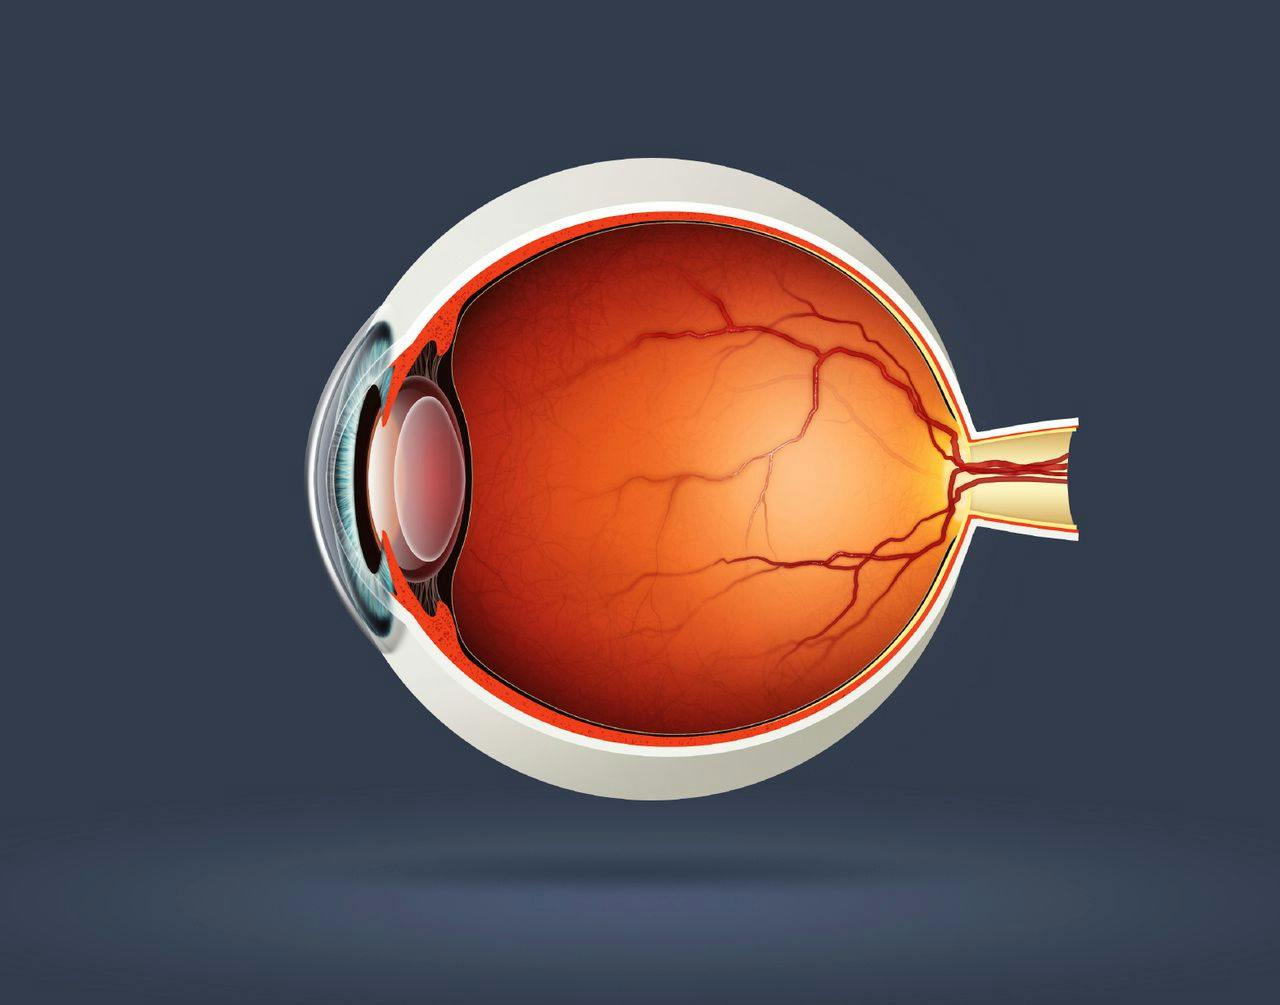 Study Outlines Prevalence, Risk Factors of Myopic Maculopathy